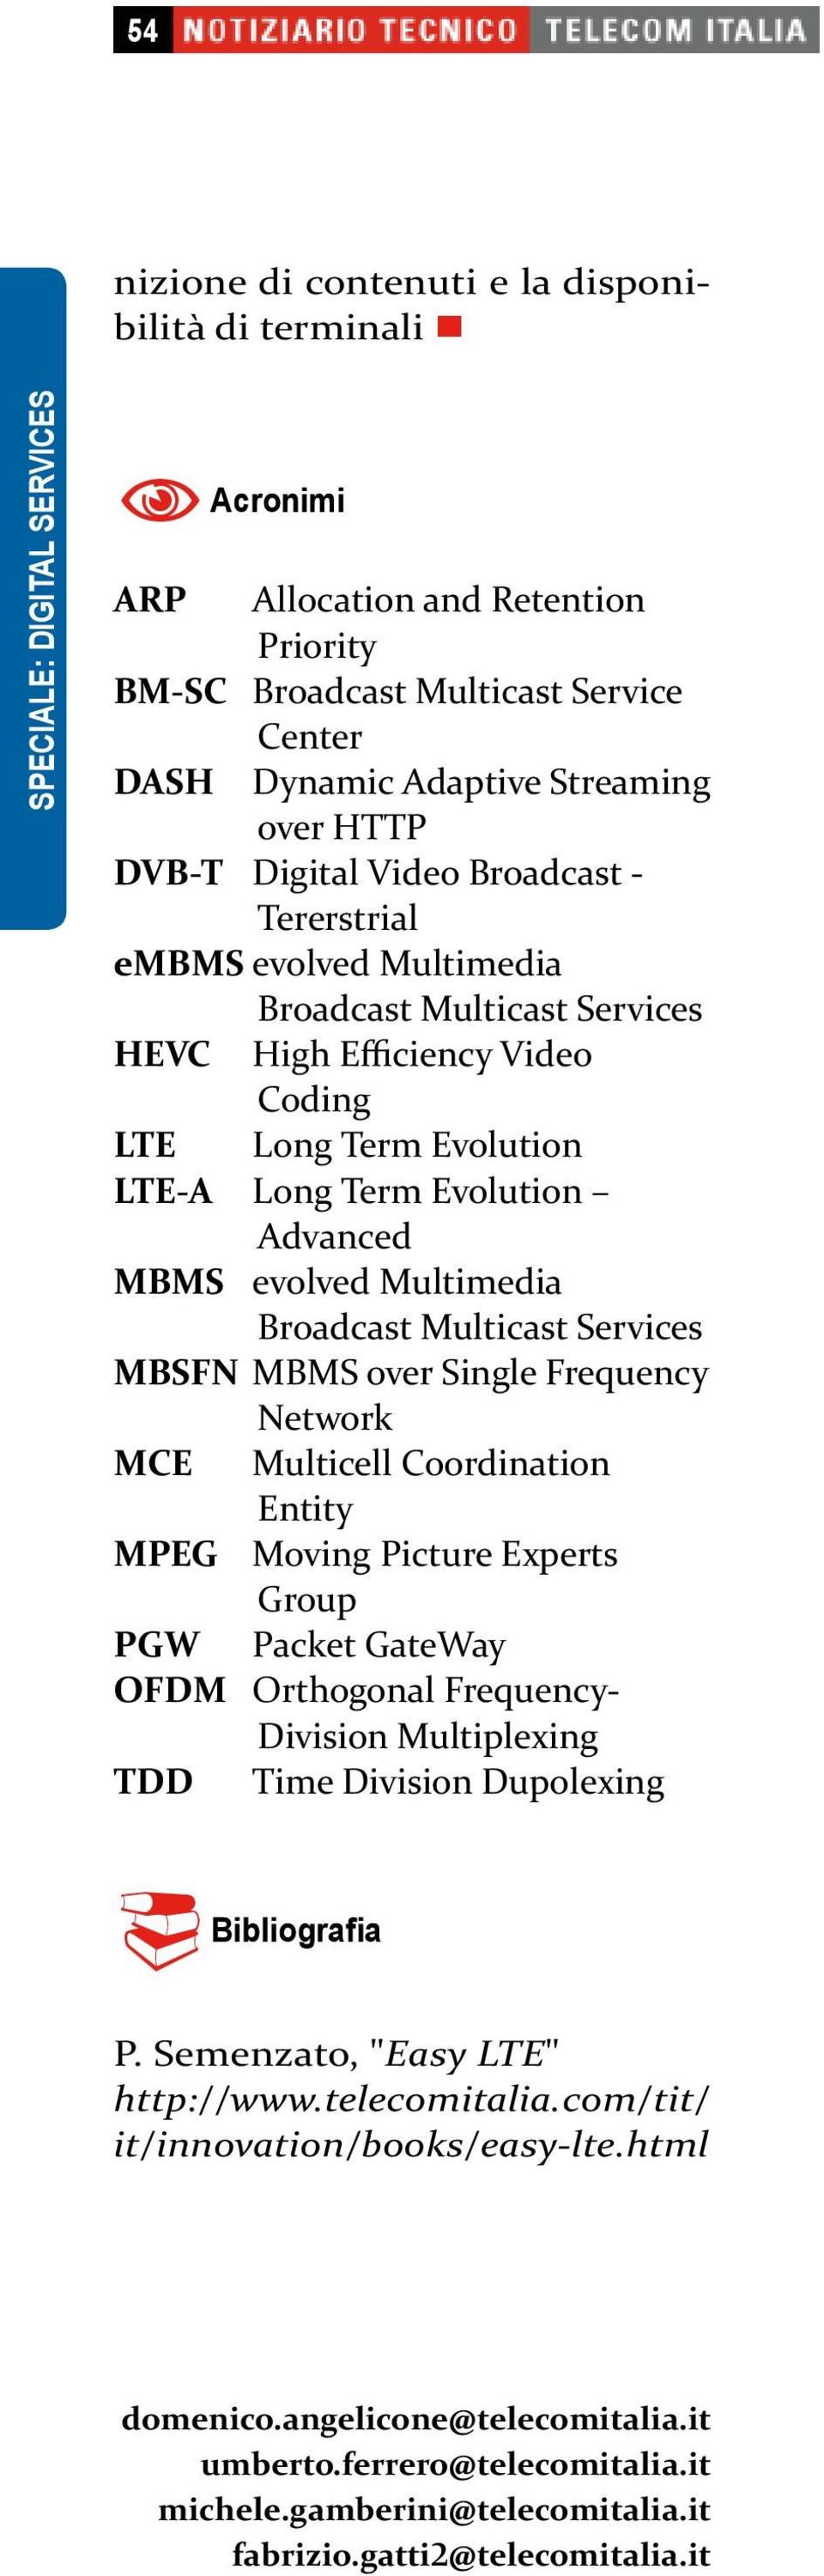 Multimedia Broadcast Multicast Services MBSFN MBMS over Single Frequency Network MCE Multicell Coordination Entity MPEG Moving Picture Experts Group PGW Packet GateWay OFDM Orthogonal Frequency-